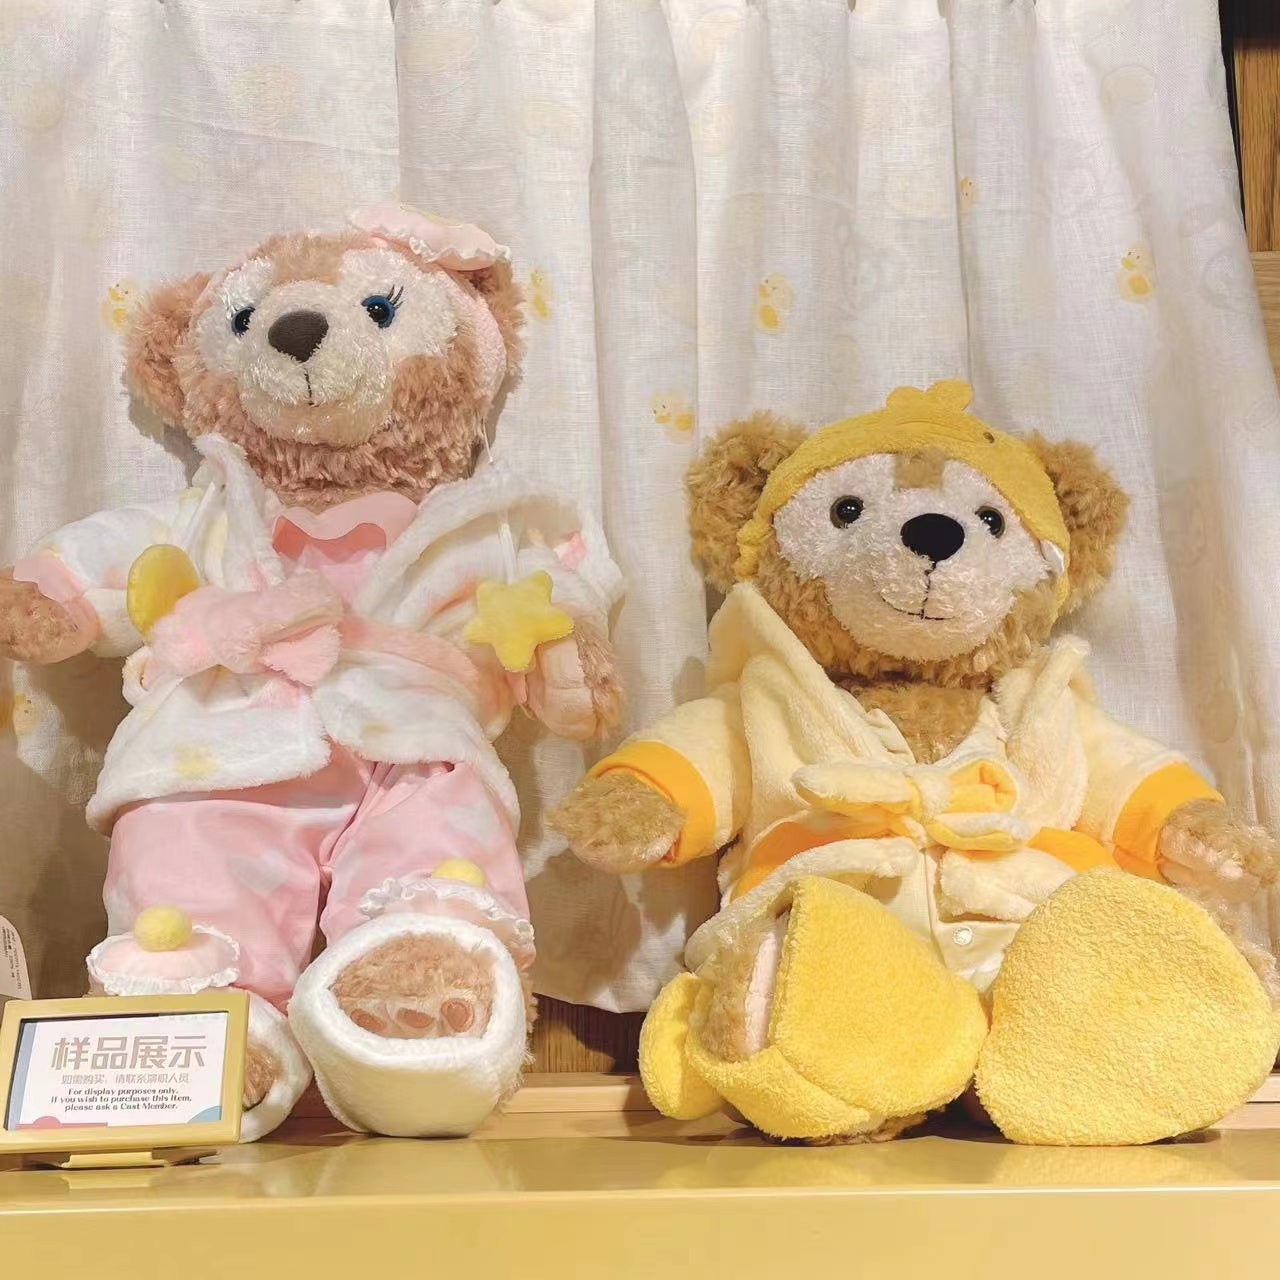 SHDL - Duffy and friends collection - Shellie May plush outfit